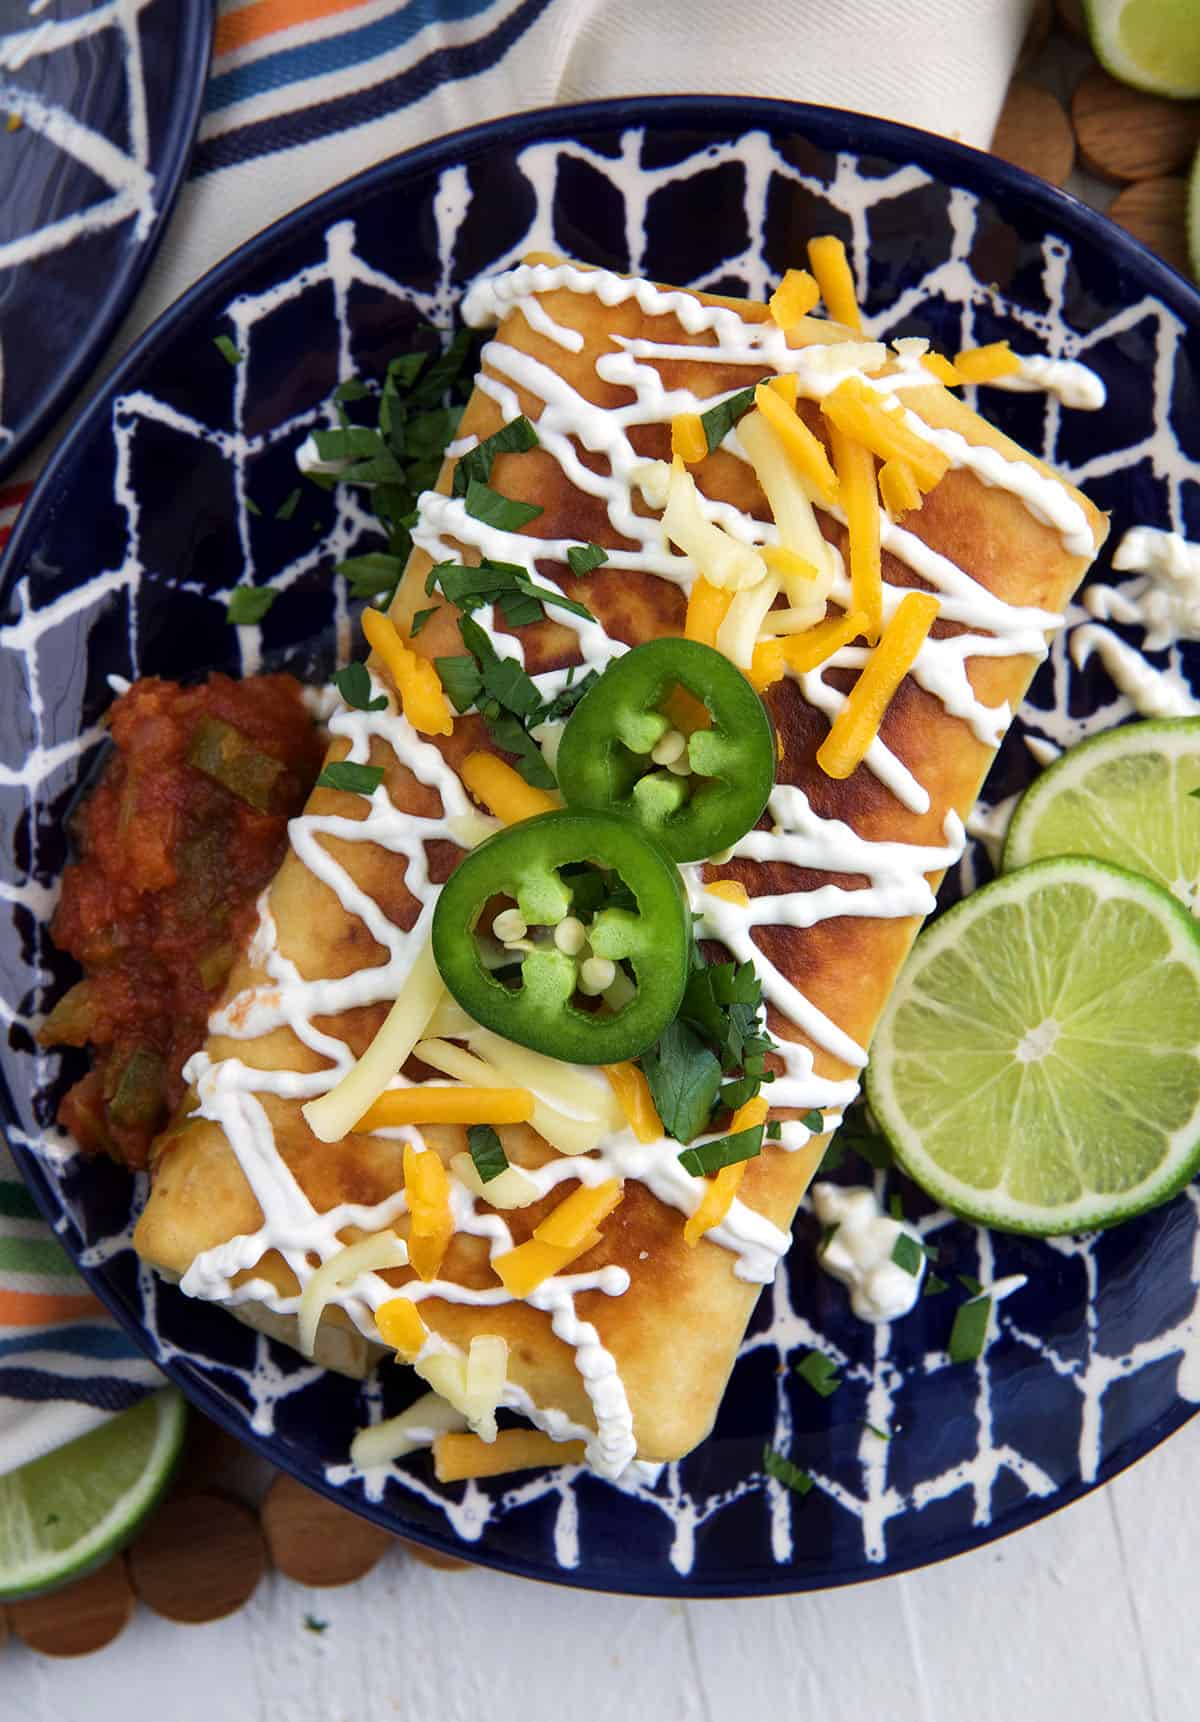 A fully garnished chimichanga is placed on a blue and white plate.